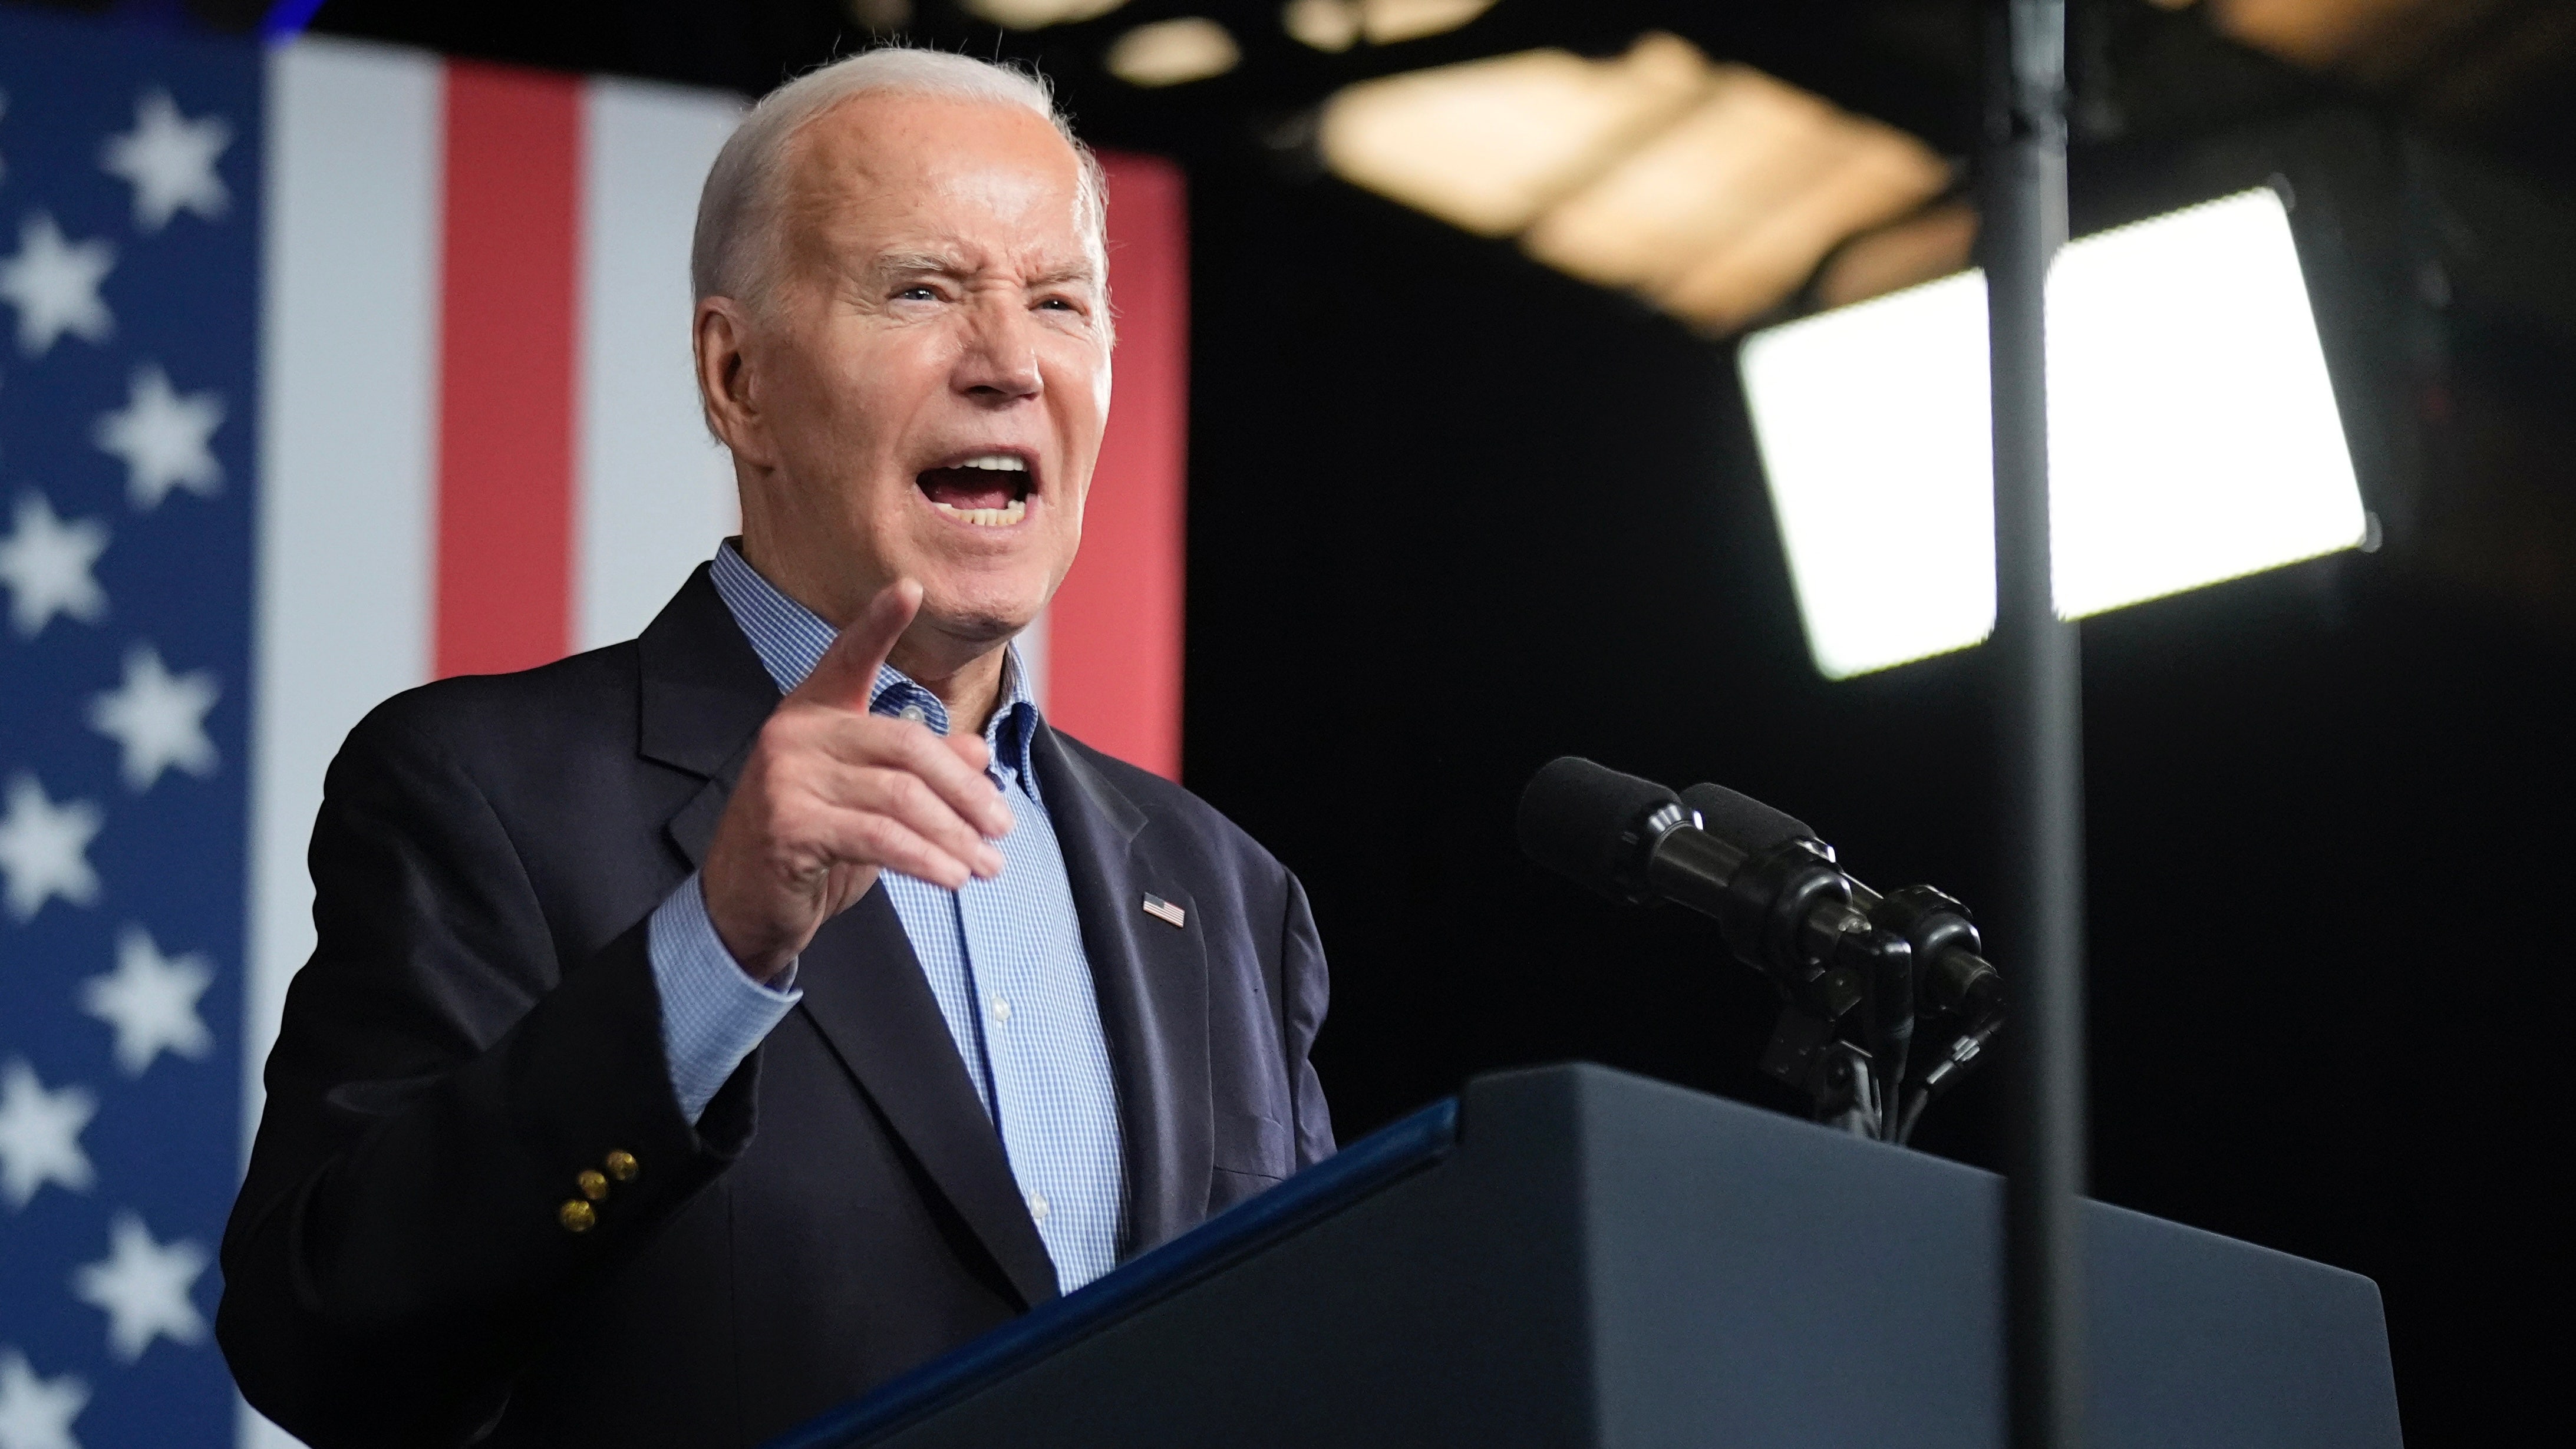 Biden returns to the key battleground state he snubbed in the presidential primaries